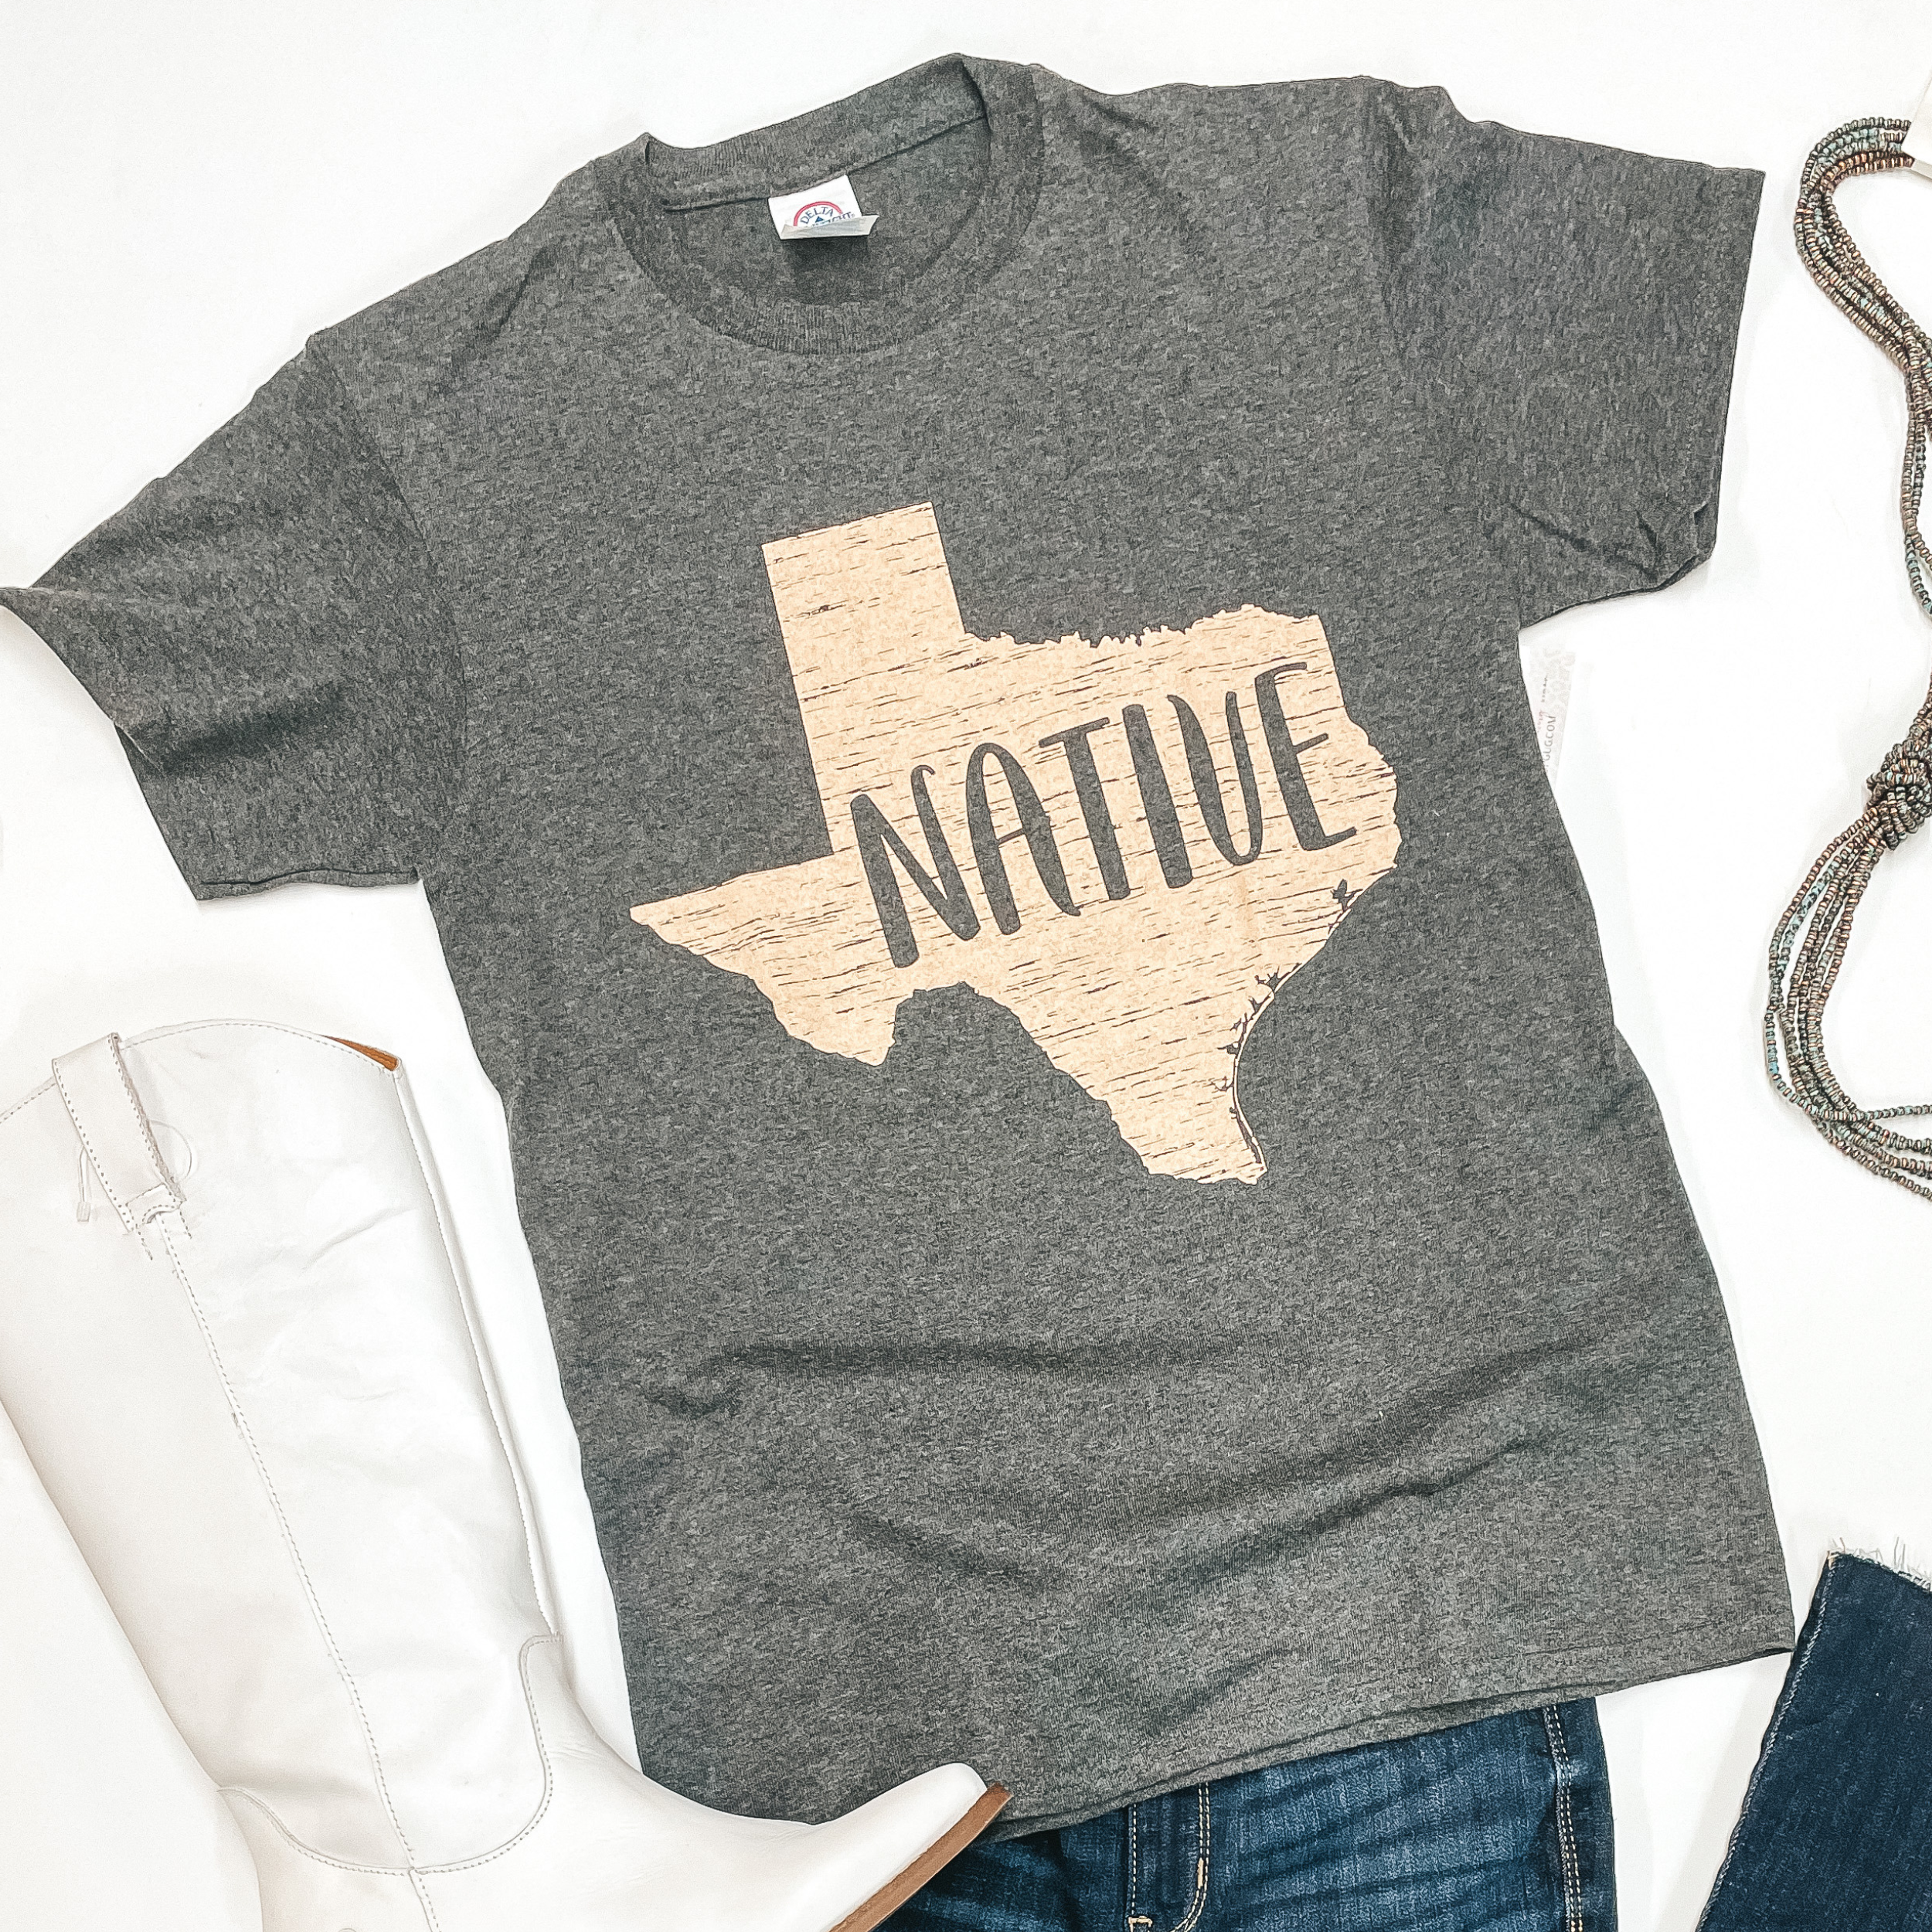 A gray tee is centered in the middle of the picture on a white background. In the center of the tee is a cream Texas with "native" in block letters. On the bottom left of the picture is white boots and bottom right is jeans. Towards the right of the picture is a long strand of faux navajo necklaces. 